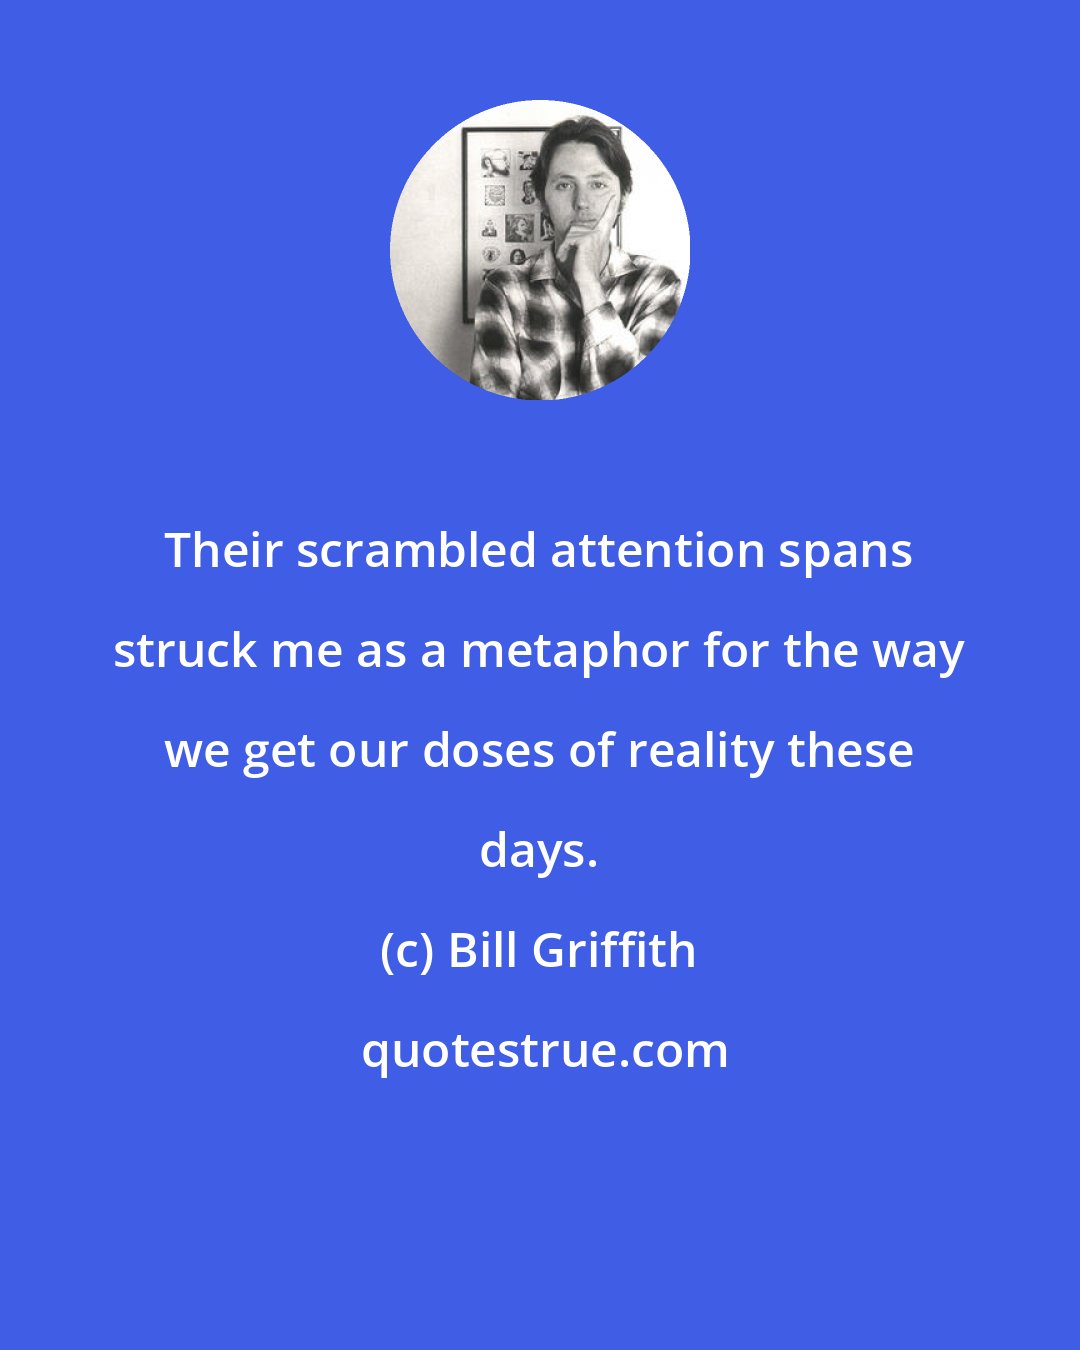 Bill Griffith: Their scrambled attention spans struck me as a metaphor for the way we get our doses of reality these days.